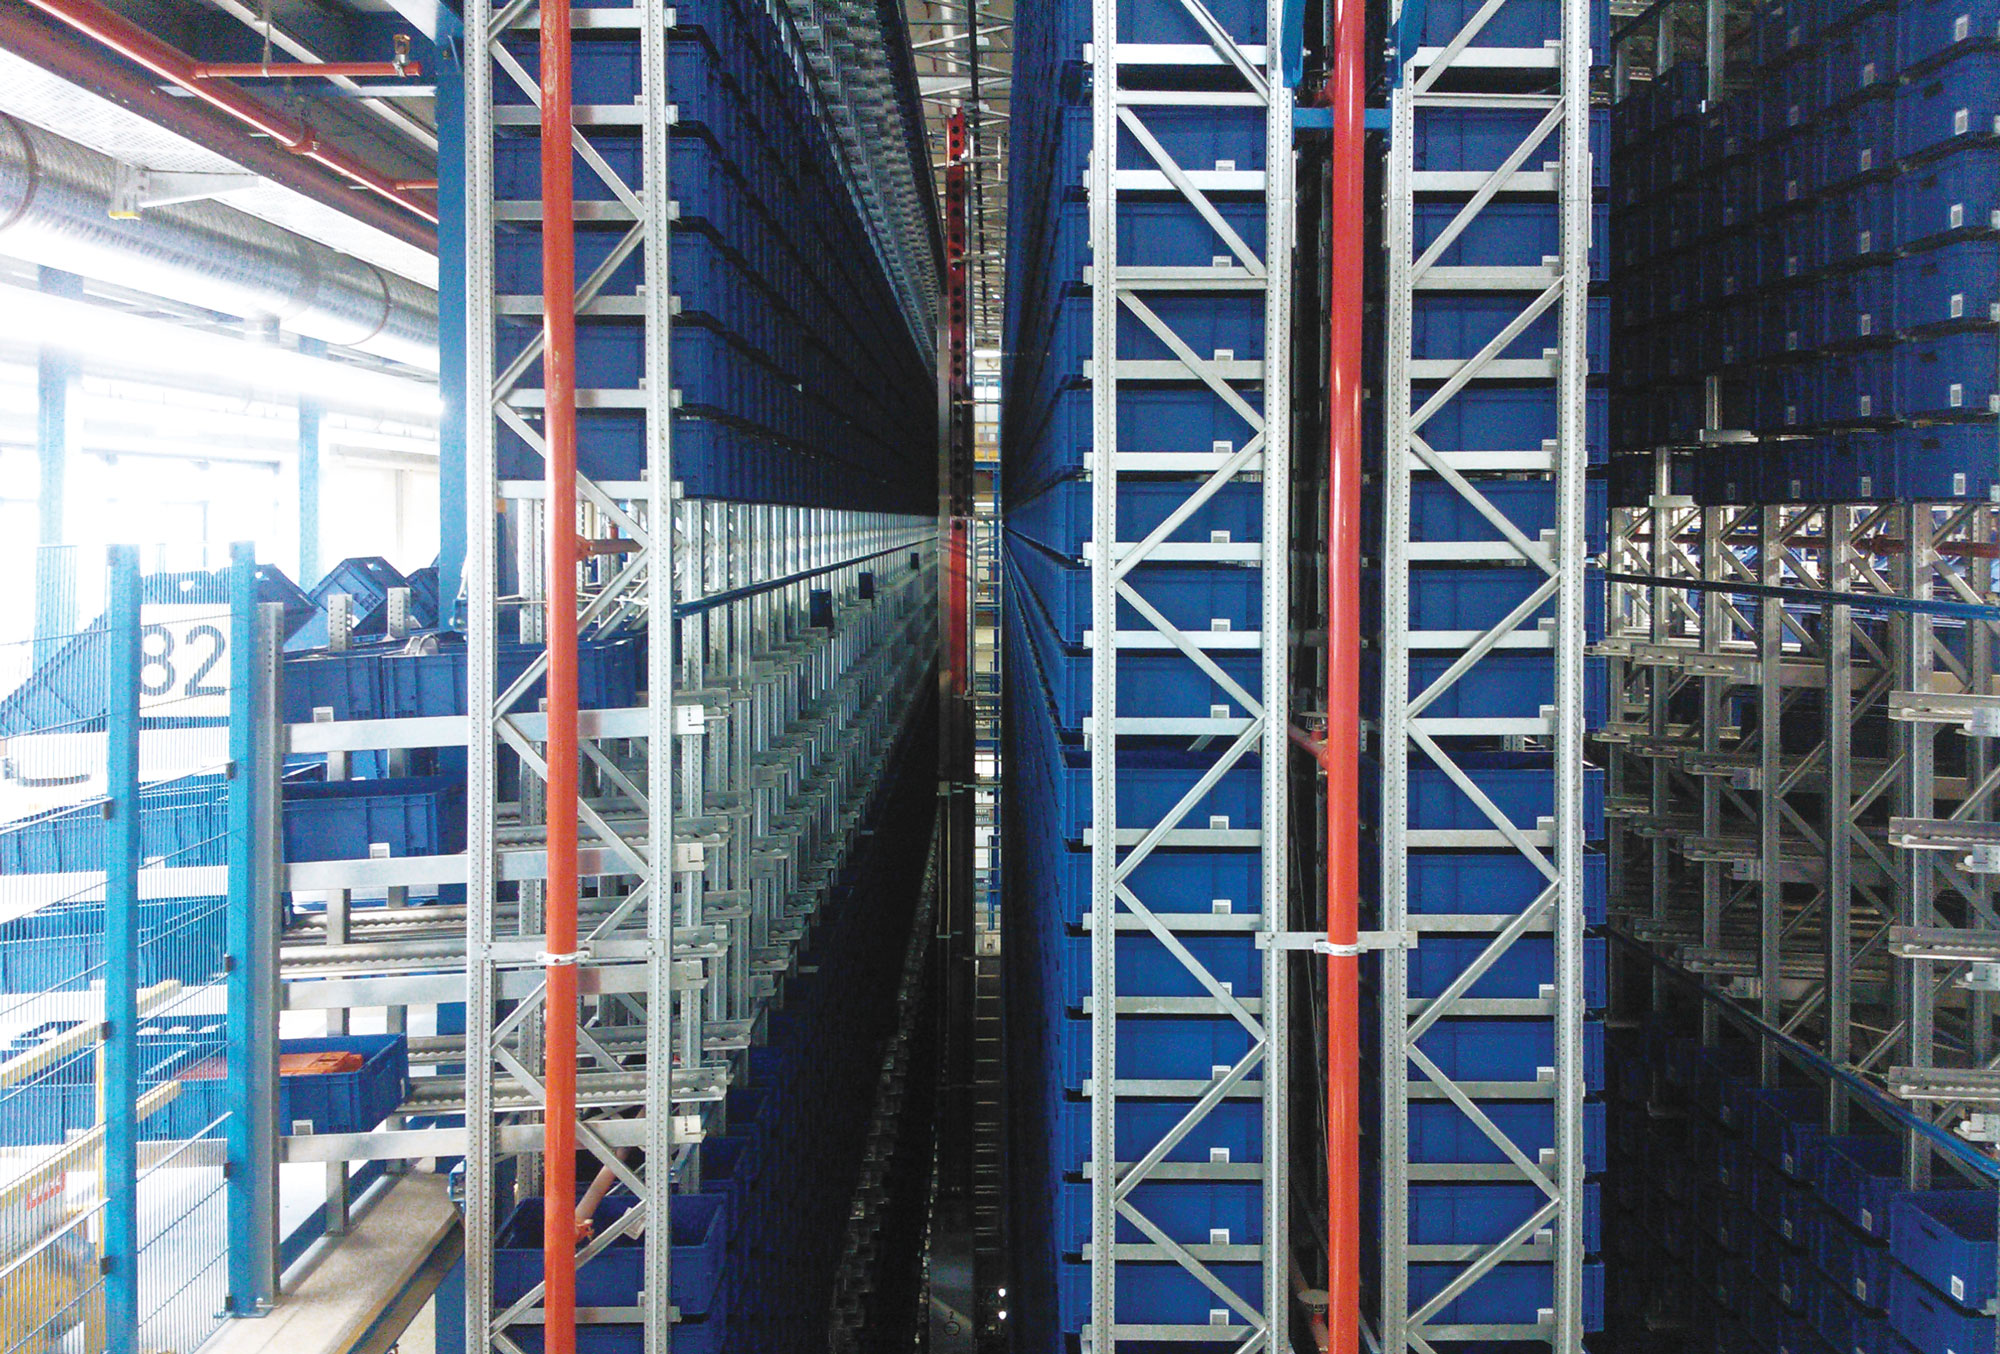 Automated storage for totes and cartons